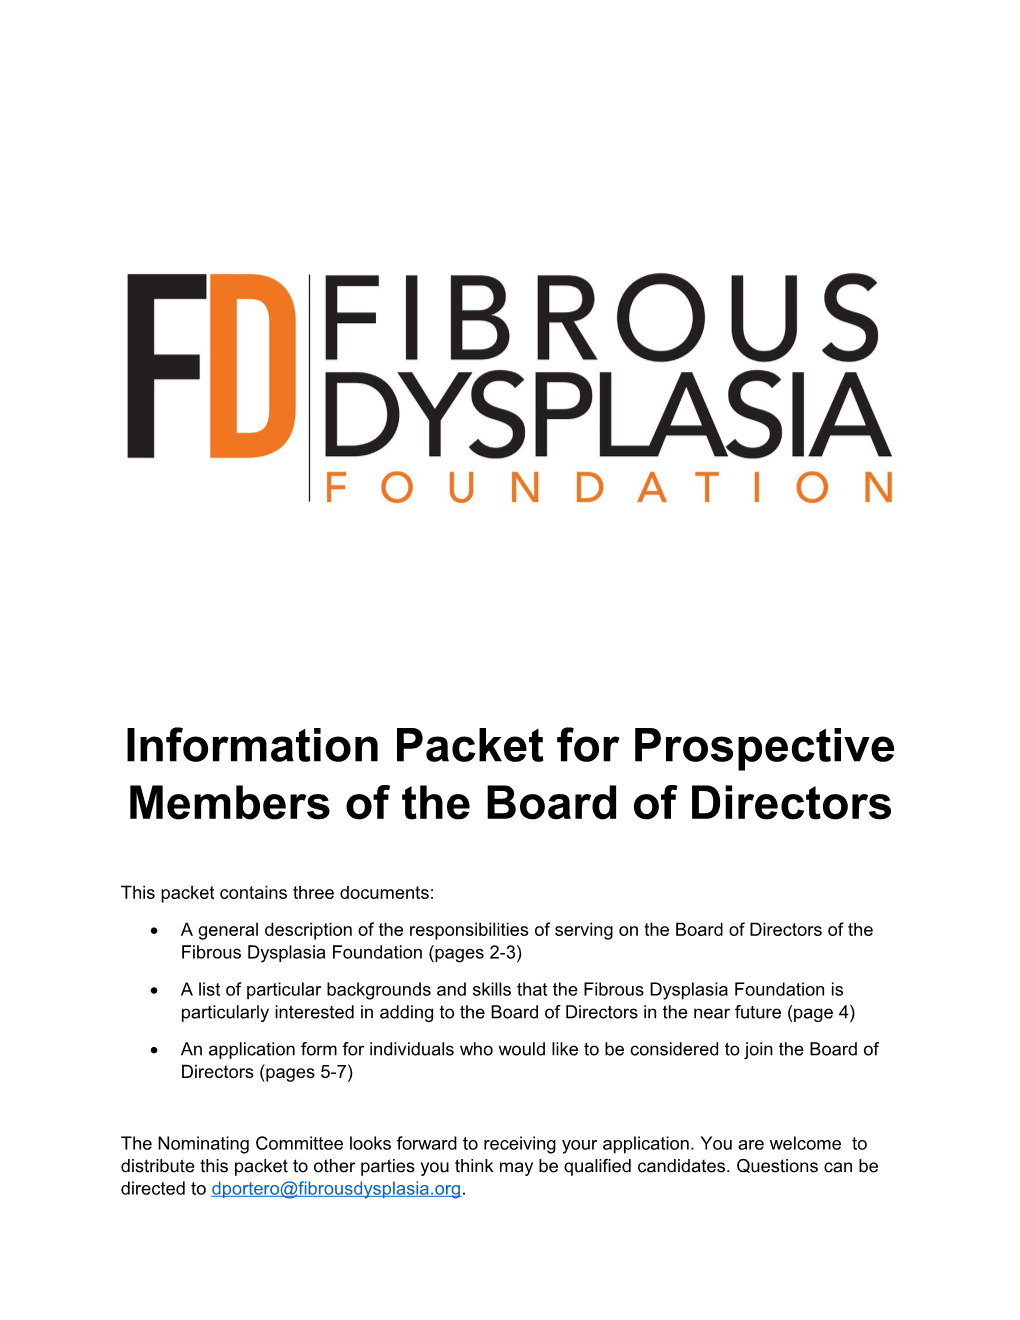 Information Packet for Prospective Members of the Board of Directors